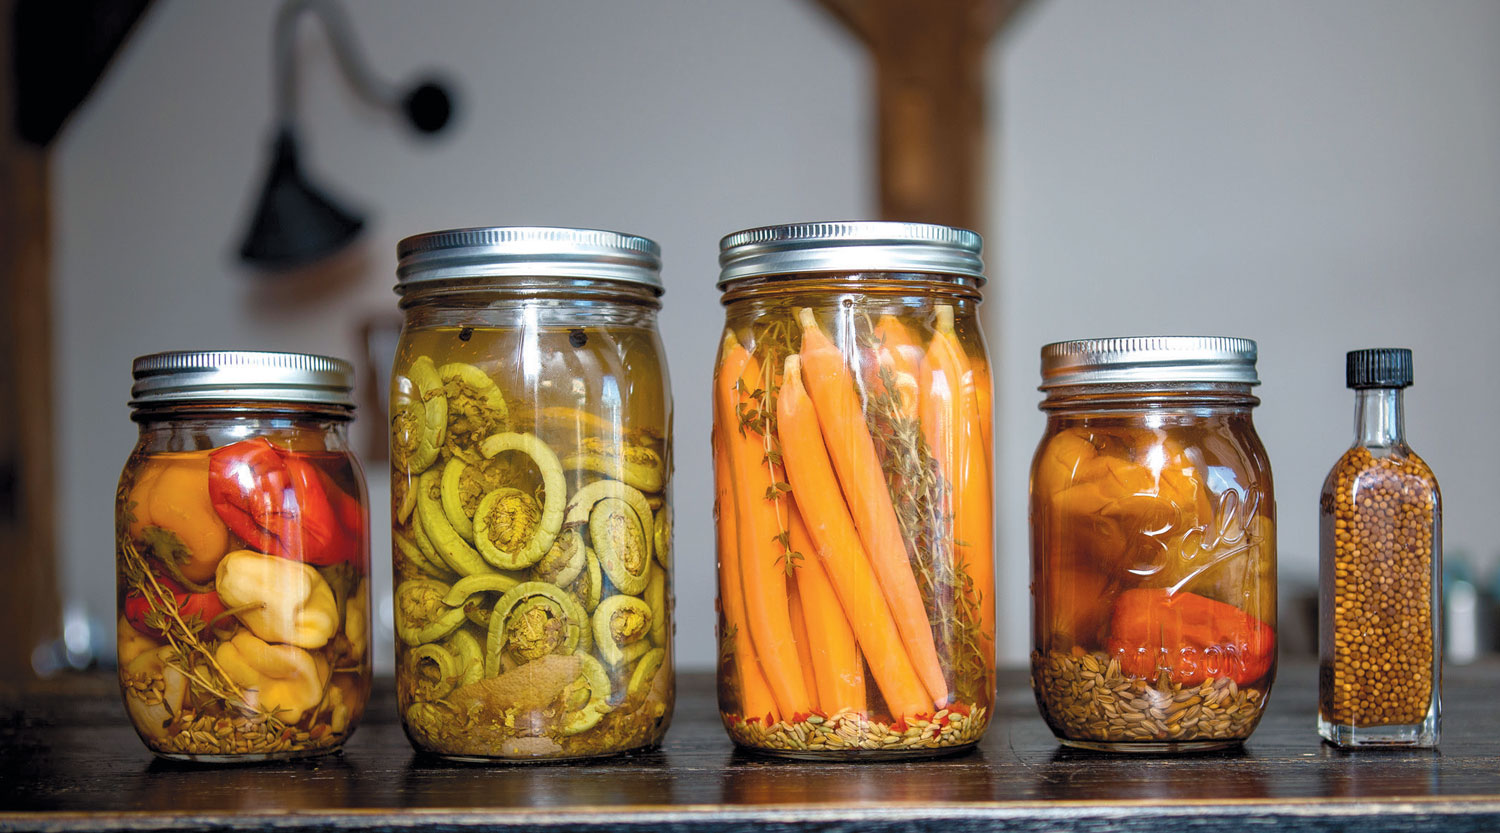 Pickled vegetables at Viaggio, including peppers, fiddlehead ferns, carrots with thyme, peppers with peppercorns and fennel seeds and mustard seeds.